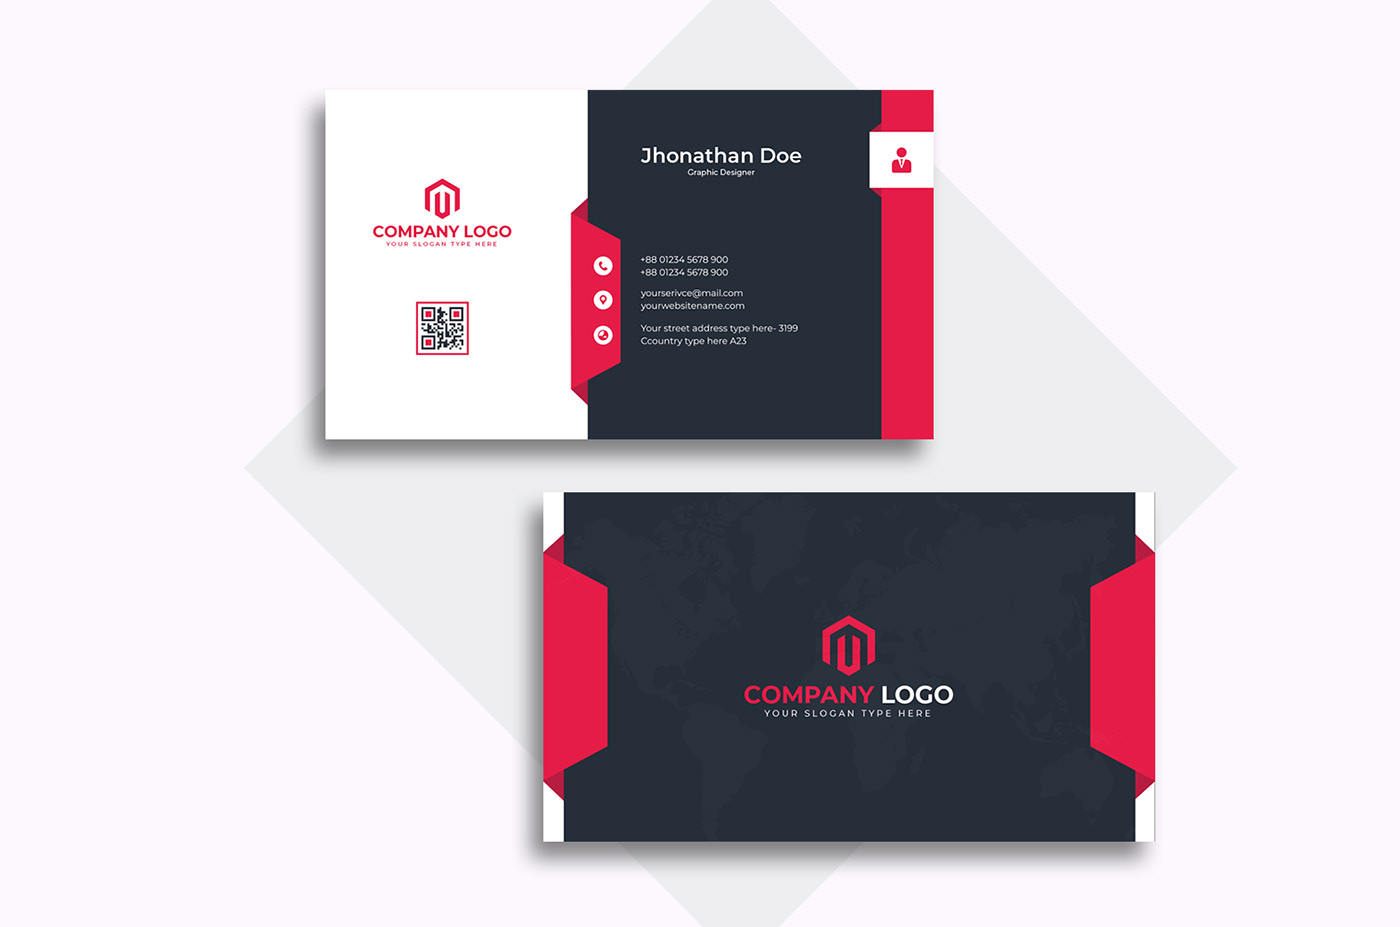 Business card professional design: Why hire a professional designer?